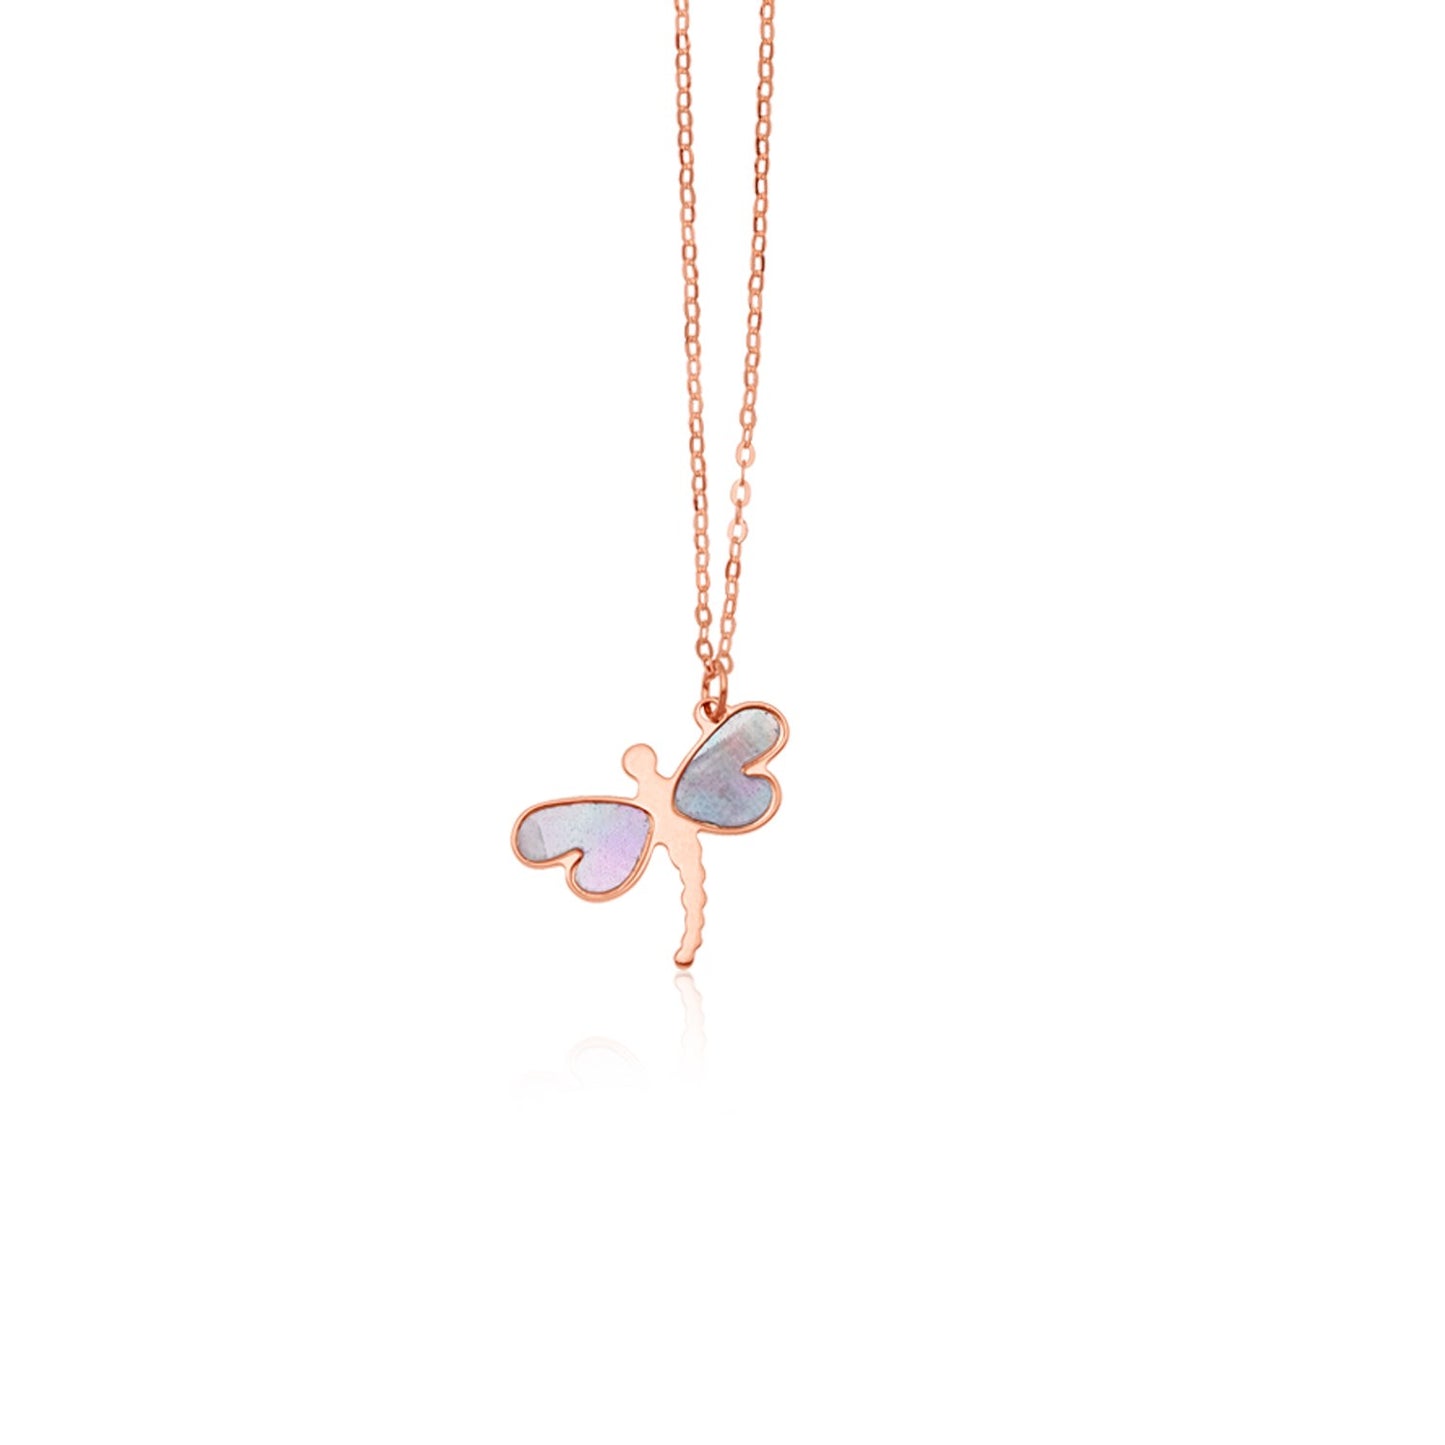 14k Rose Gold Dragonfly Necklace with White Mother of Pearl